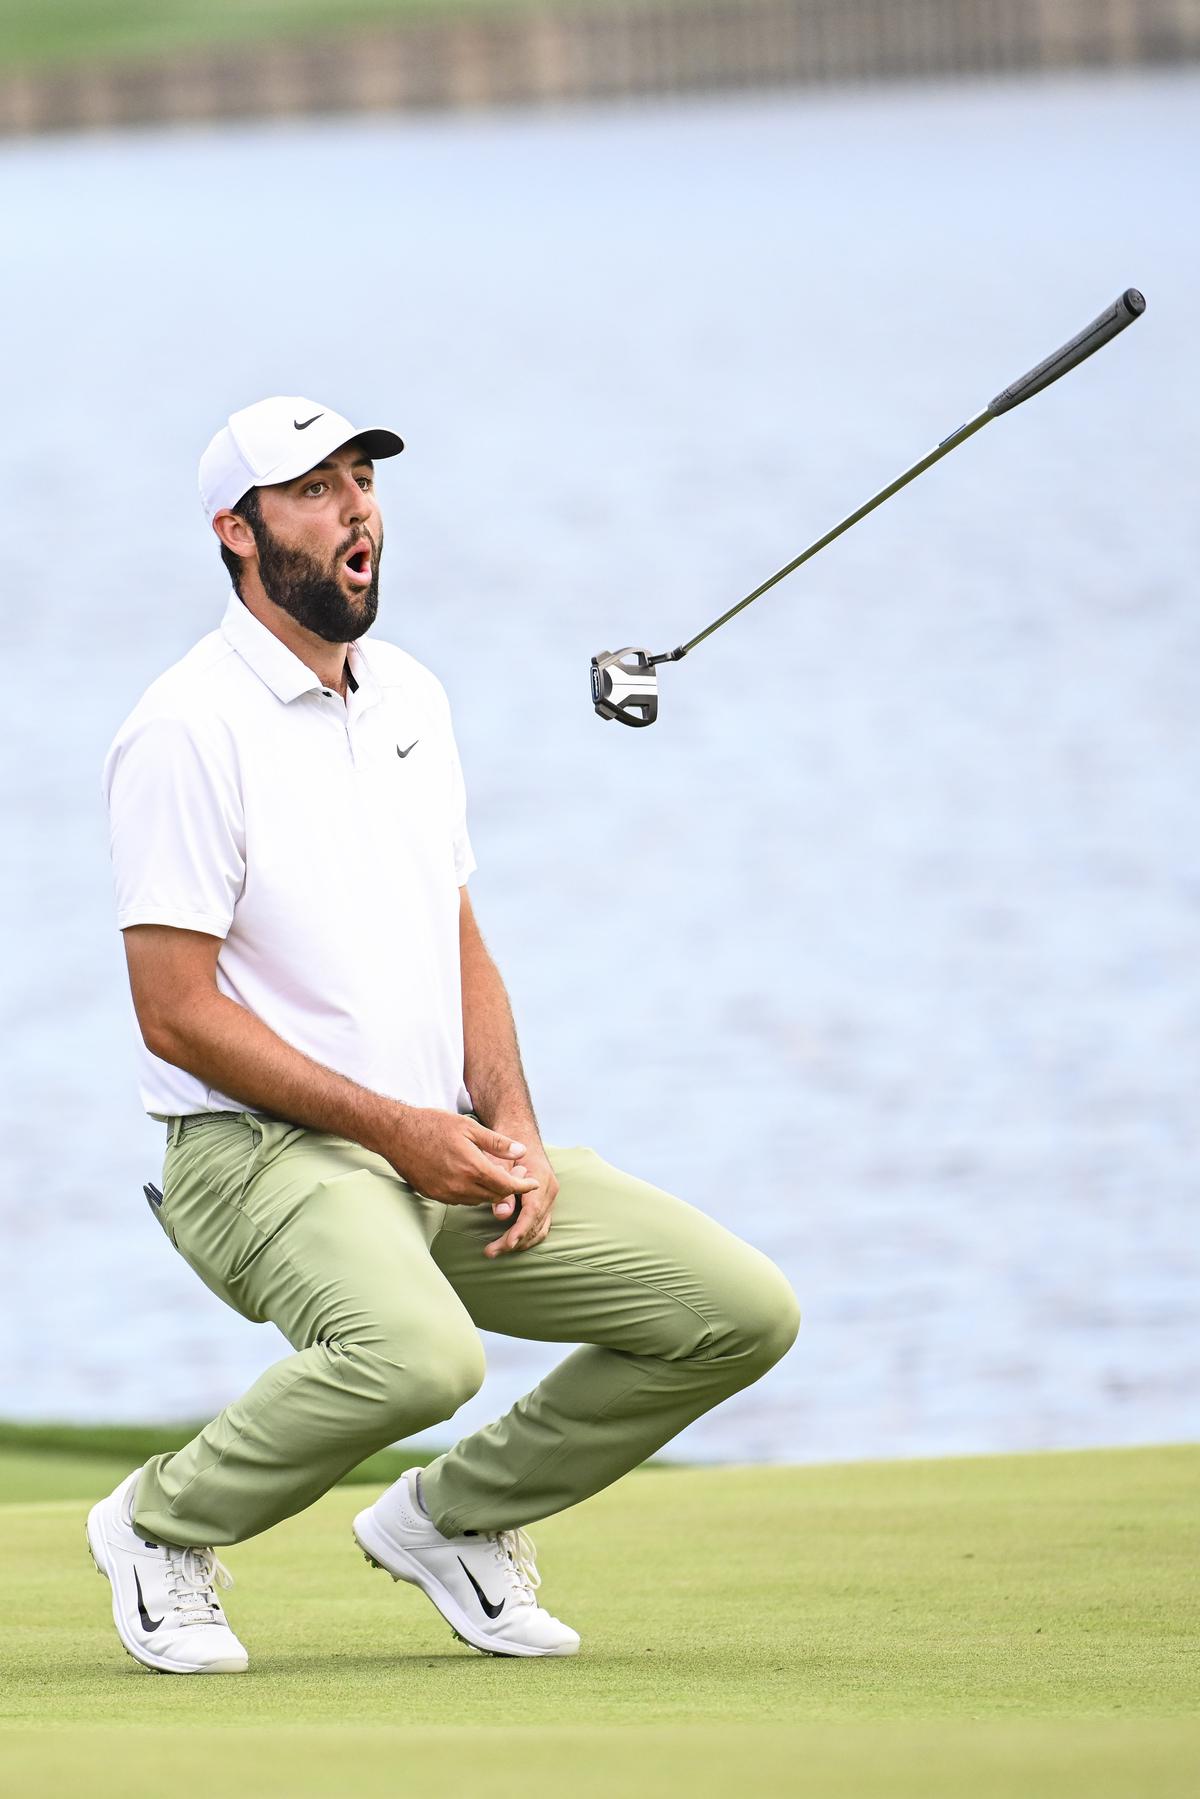 Change of gear: If there’s a chink in Scheffler’s armour, it’s his touch on the greens. To address this weakness, he recently switched from a blade to a mallet putter, saying he ‘lines this putter up well in the middle of the face’. | Photo credit: Getty Images